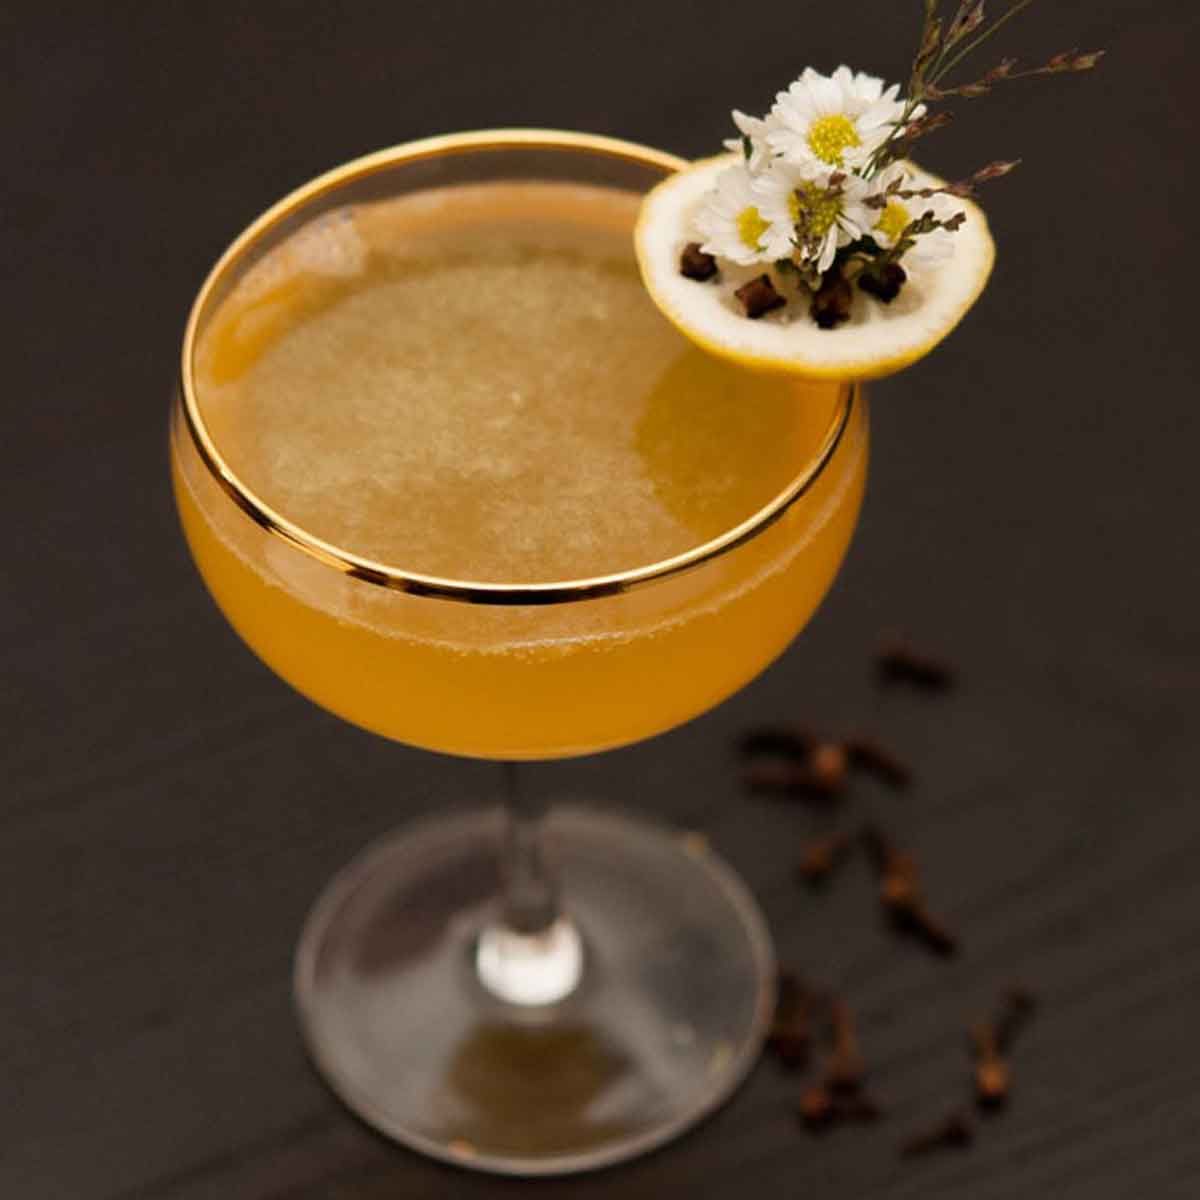 A cocktail garnished with lemon, flowers and cloves on a table, with lemon slices, flowers and cloves at its base.